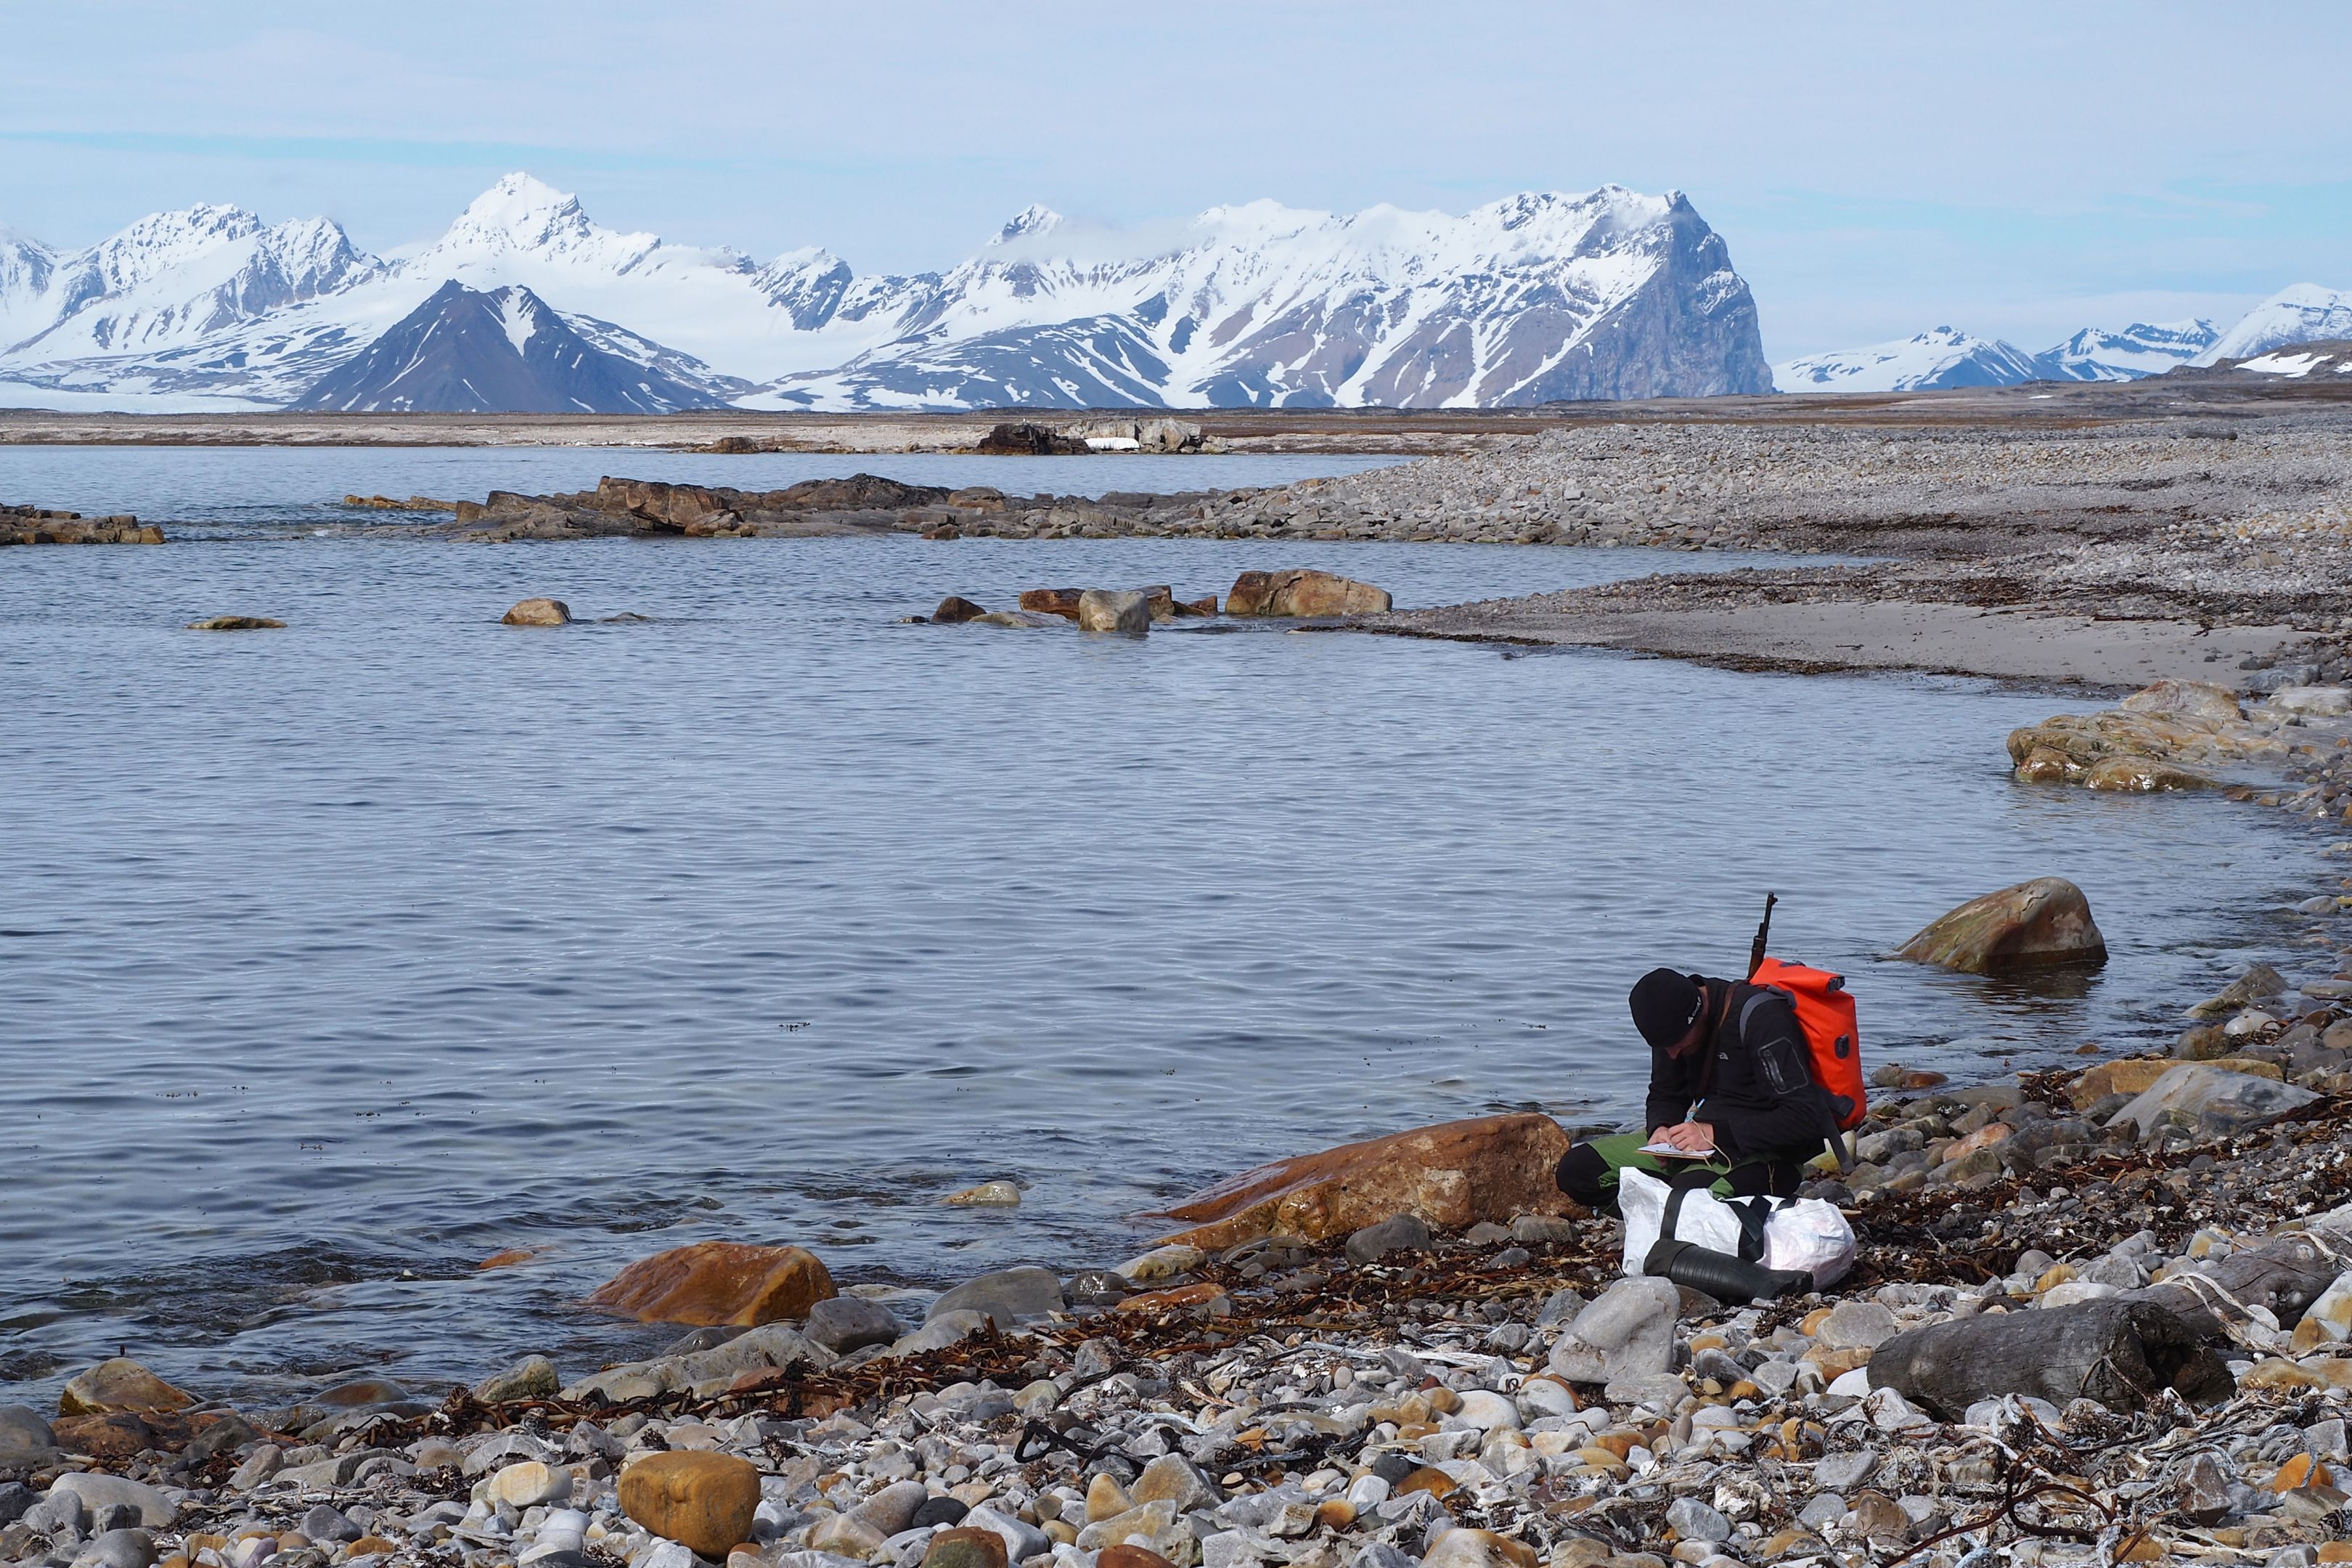 A researcher collecting samples on a rocky beach in Svalbard.